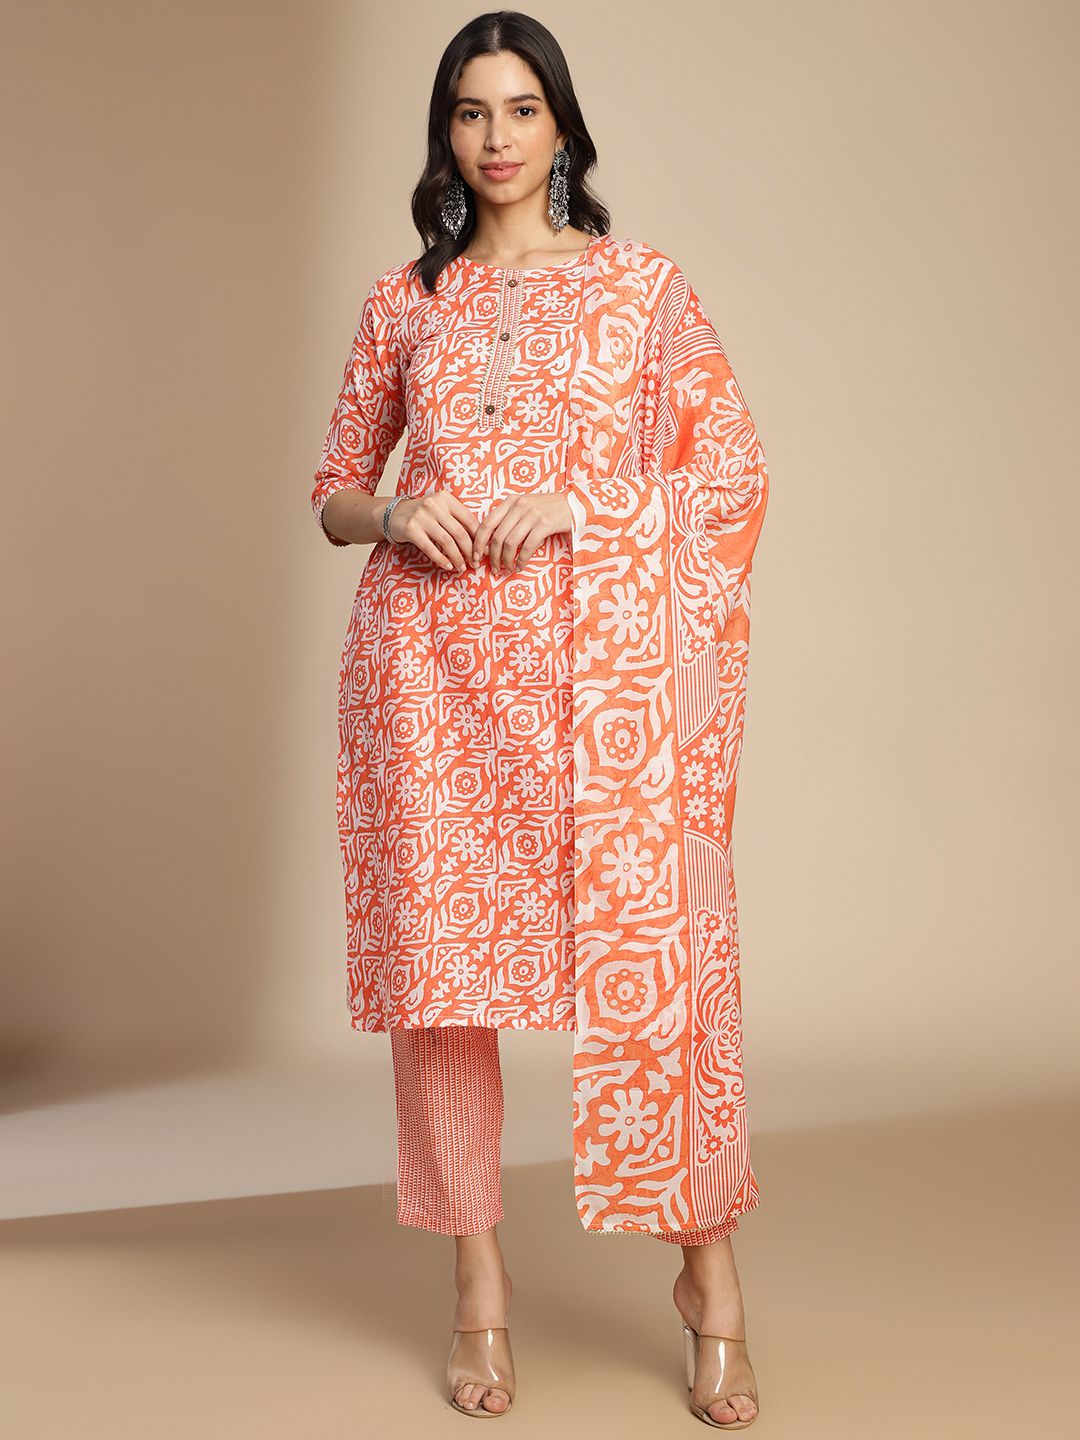     			Aarrah Cotton Blend Printed Ethnic Top With Salwar Women's Stitched Salwar Suit - Orange ( Pack of 1 )